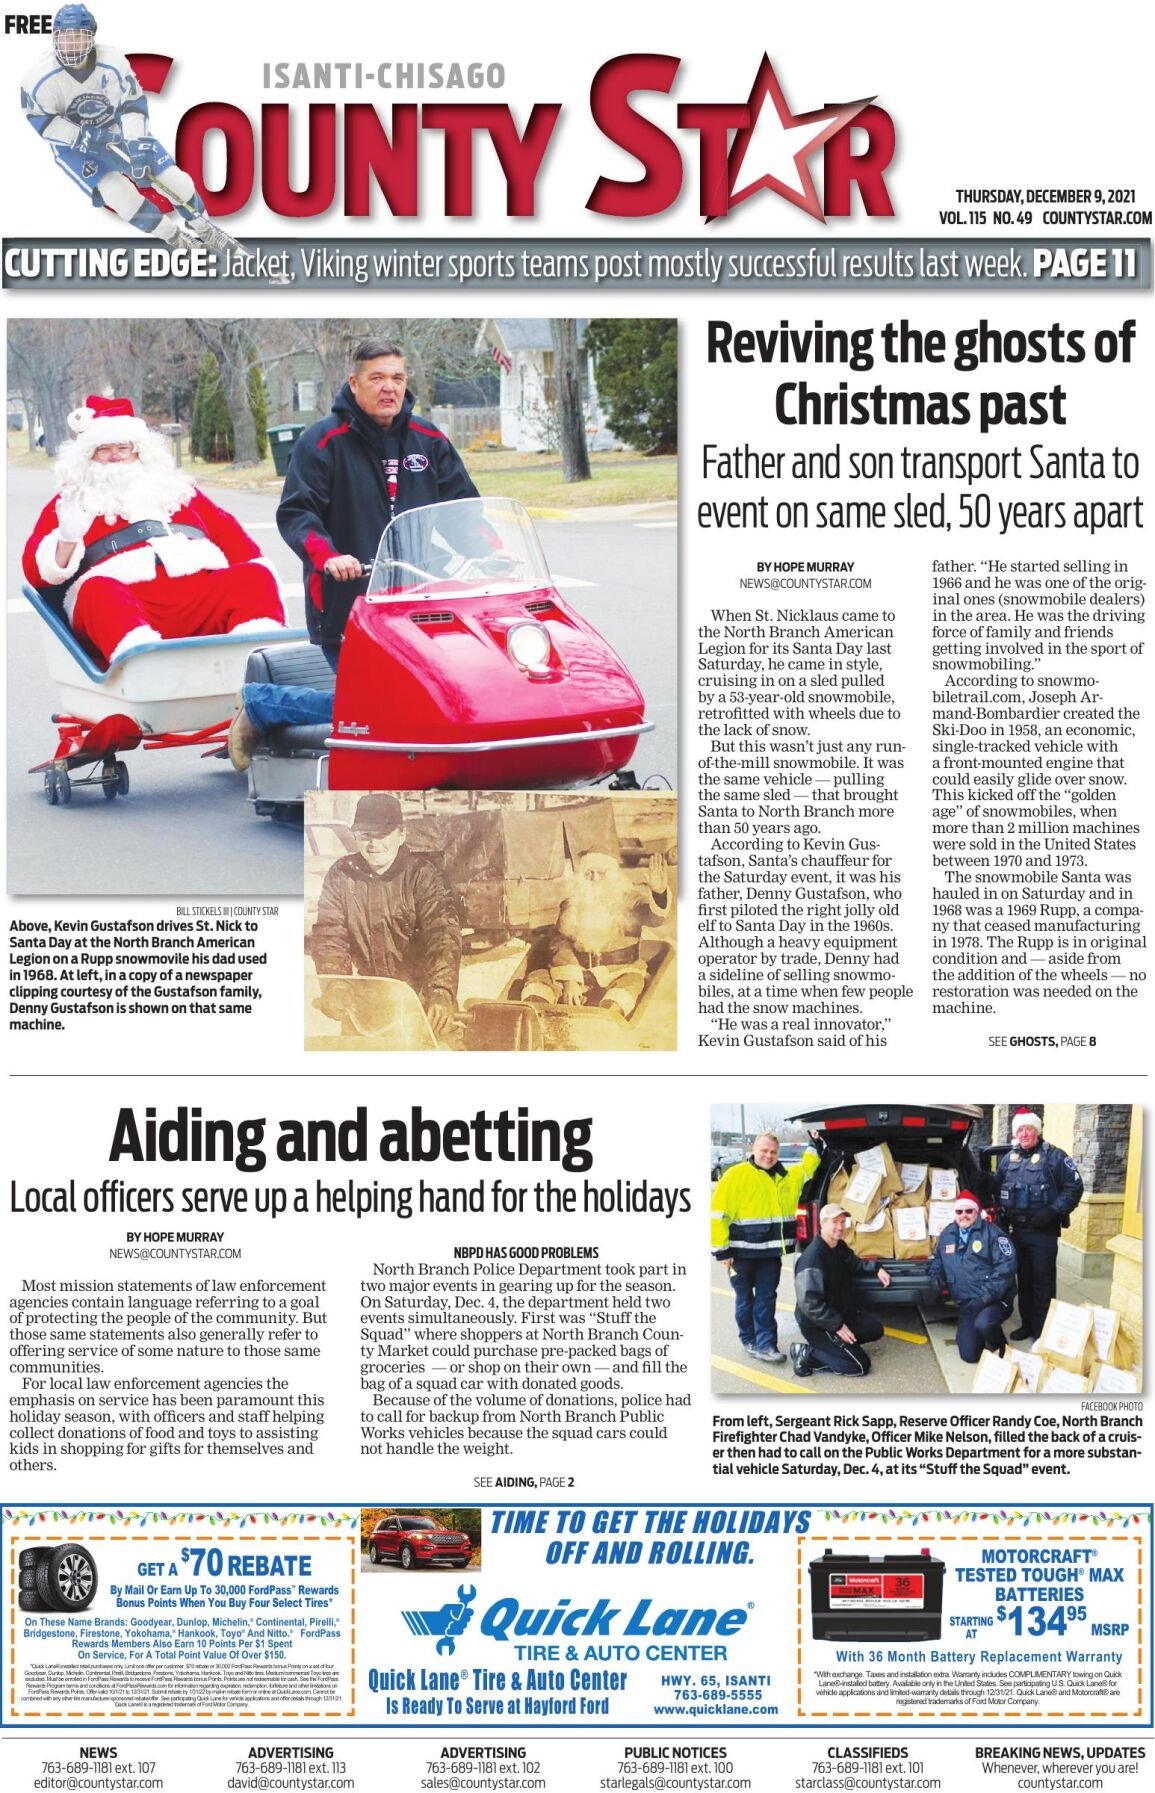 Isanti-Chisago County Star December 9, 2021 e-edition